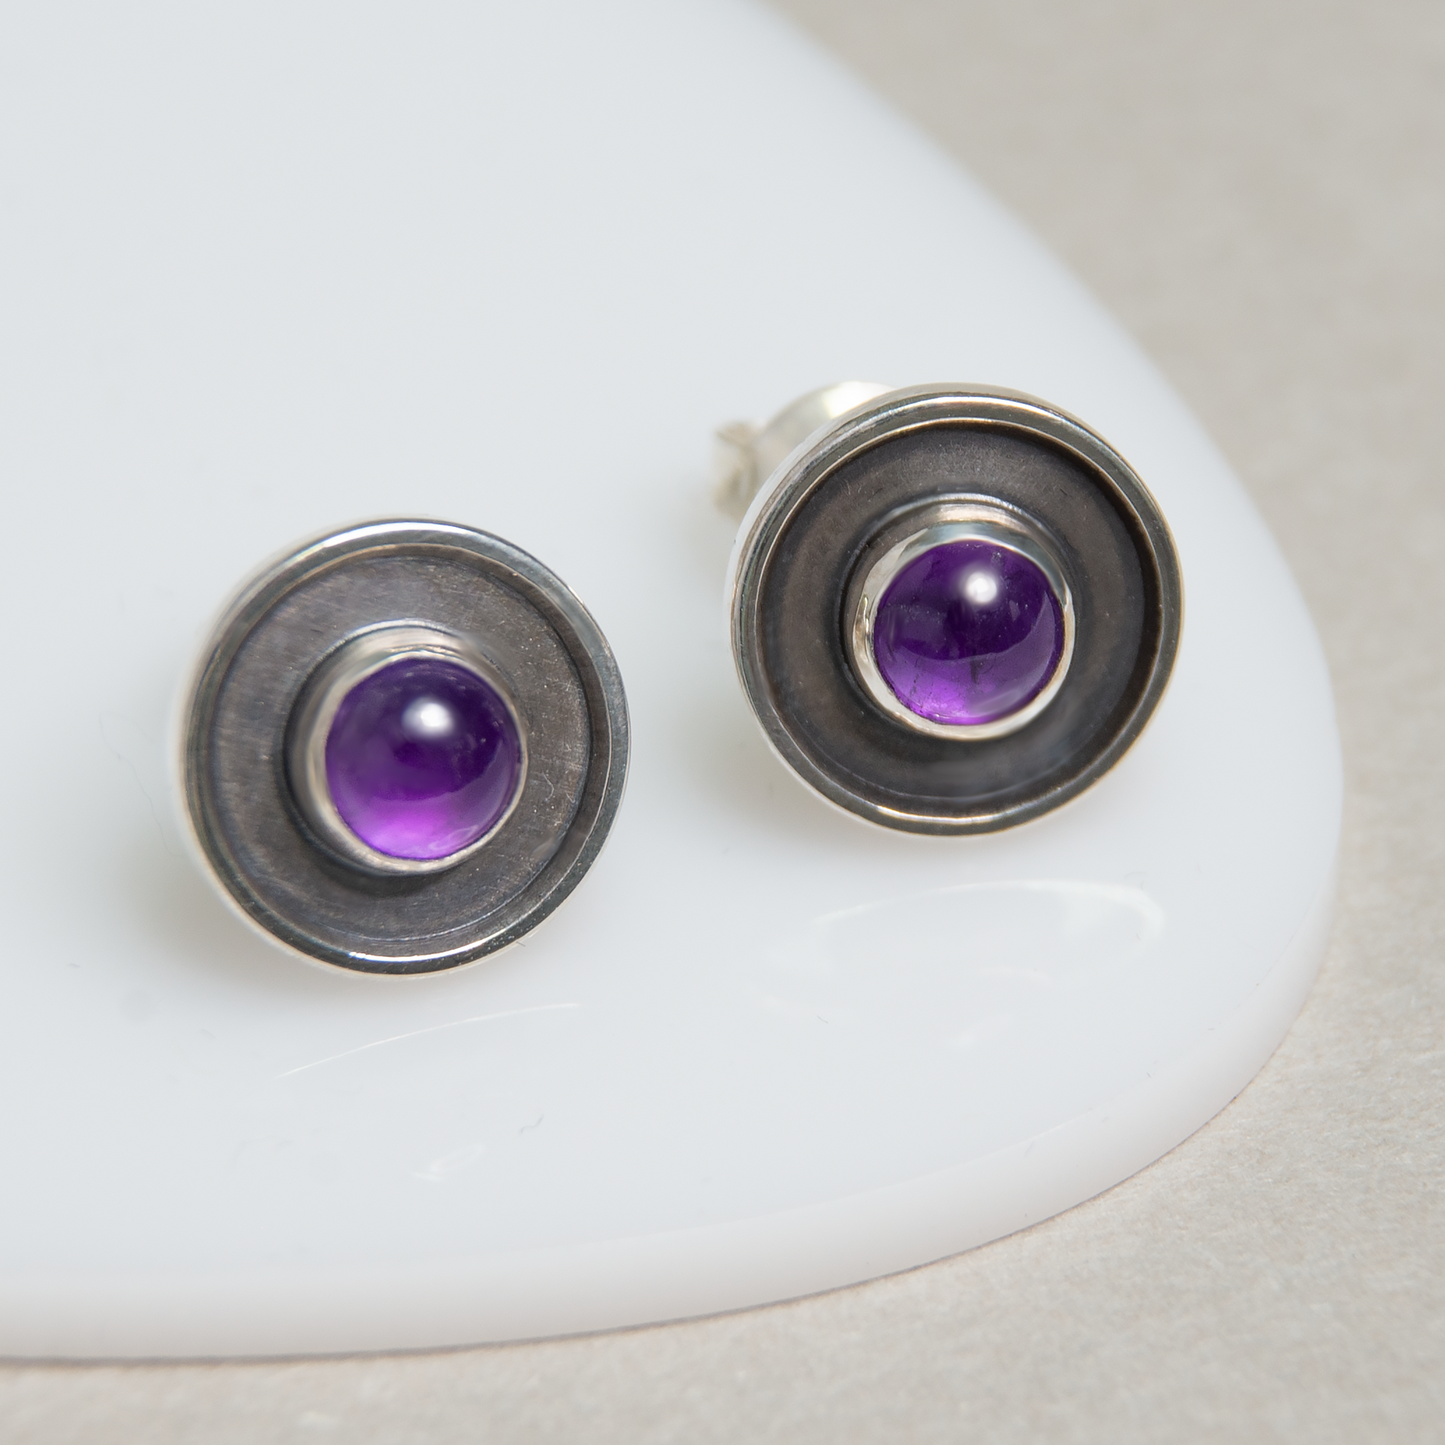 Round Circle Minimalist, Oxidized Silver Earrings With Amethyst Stone